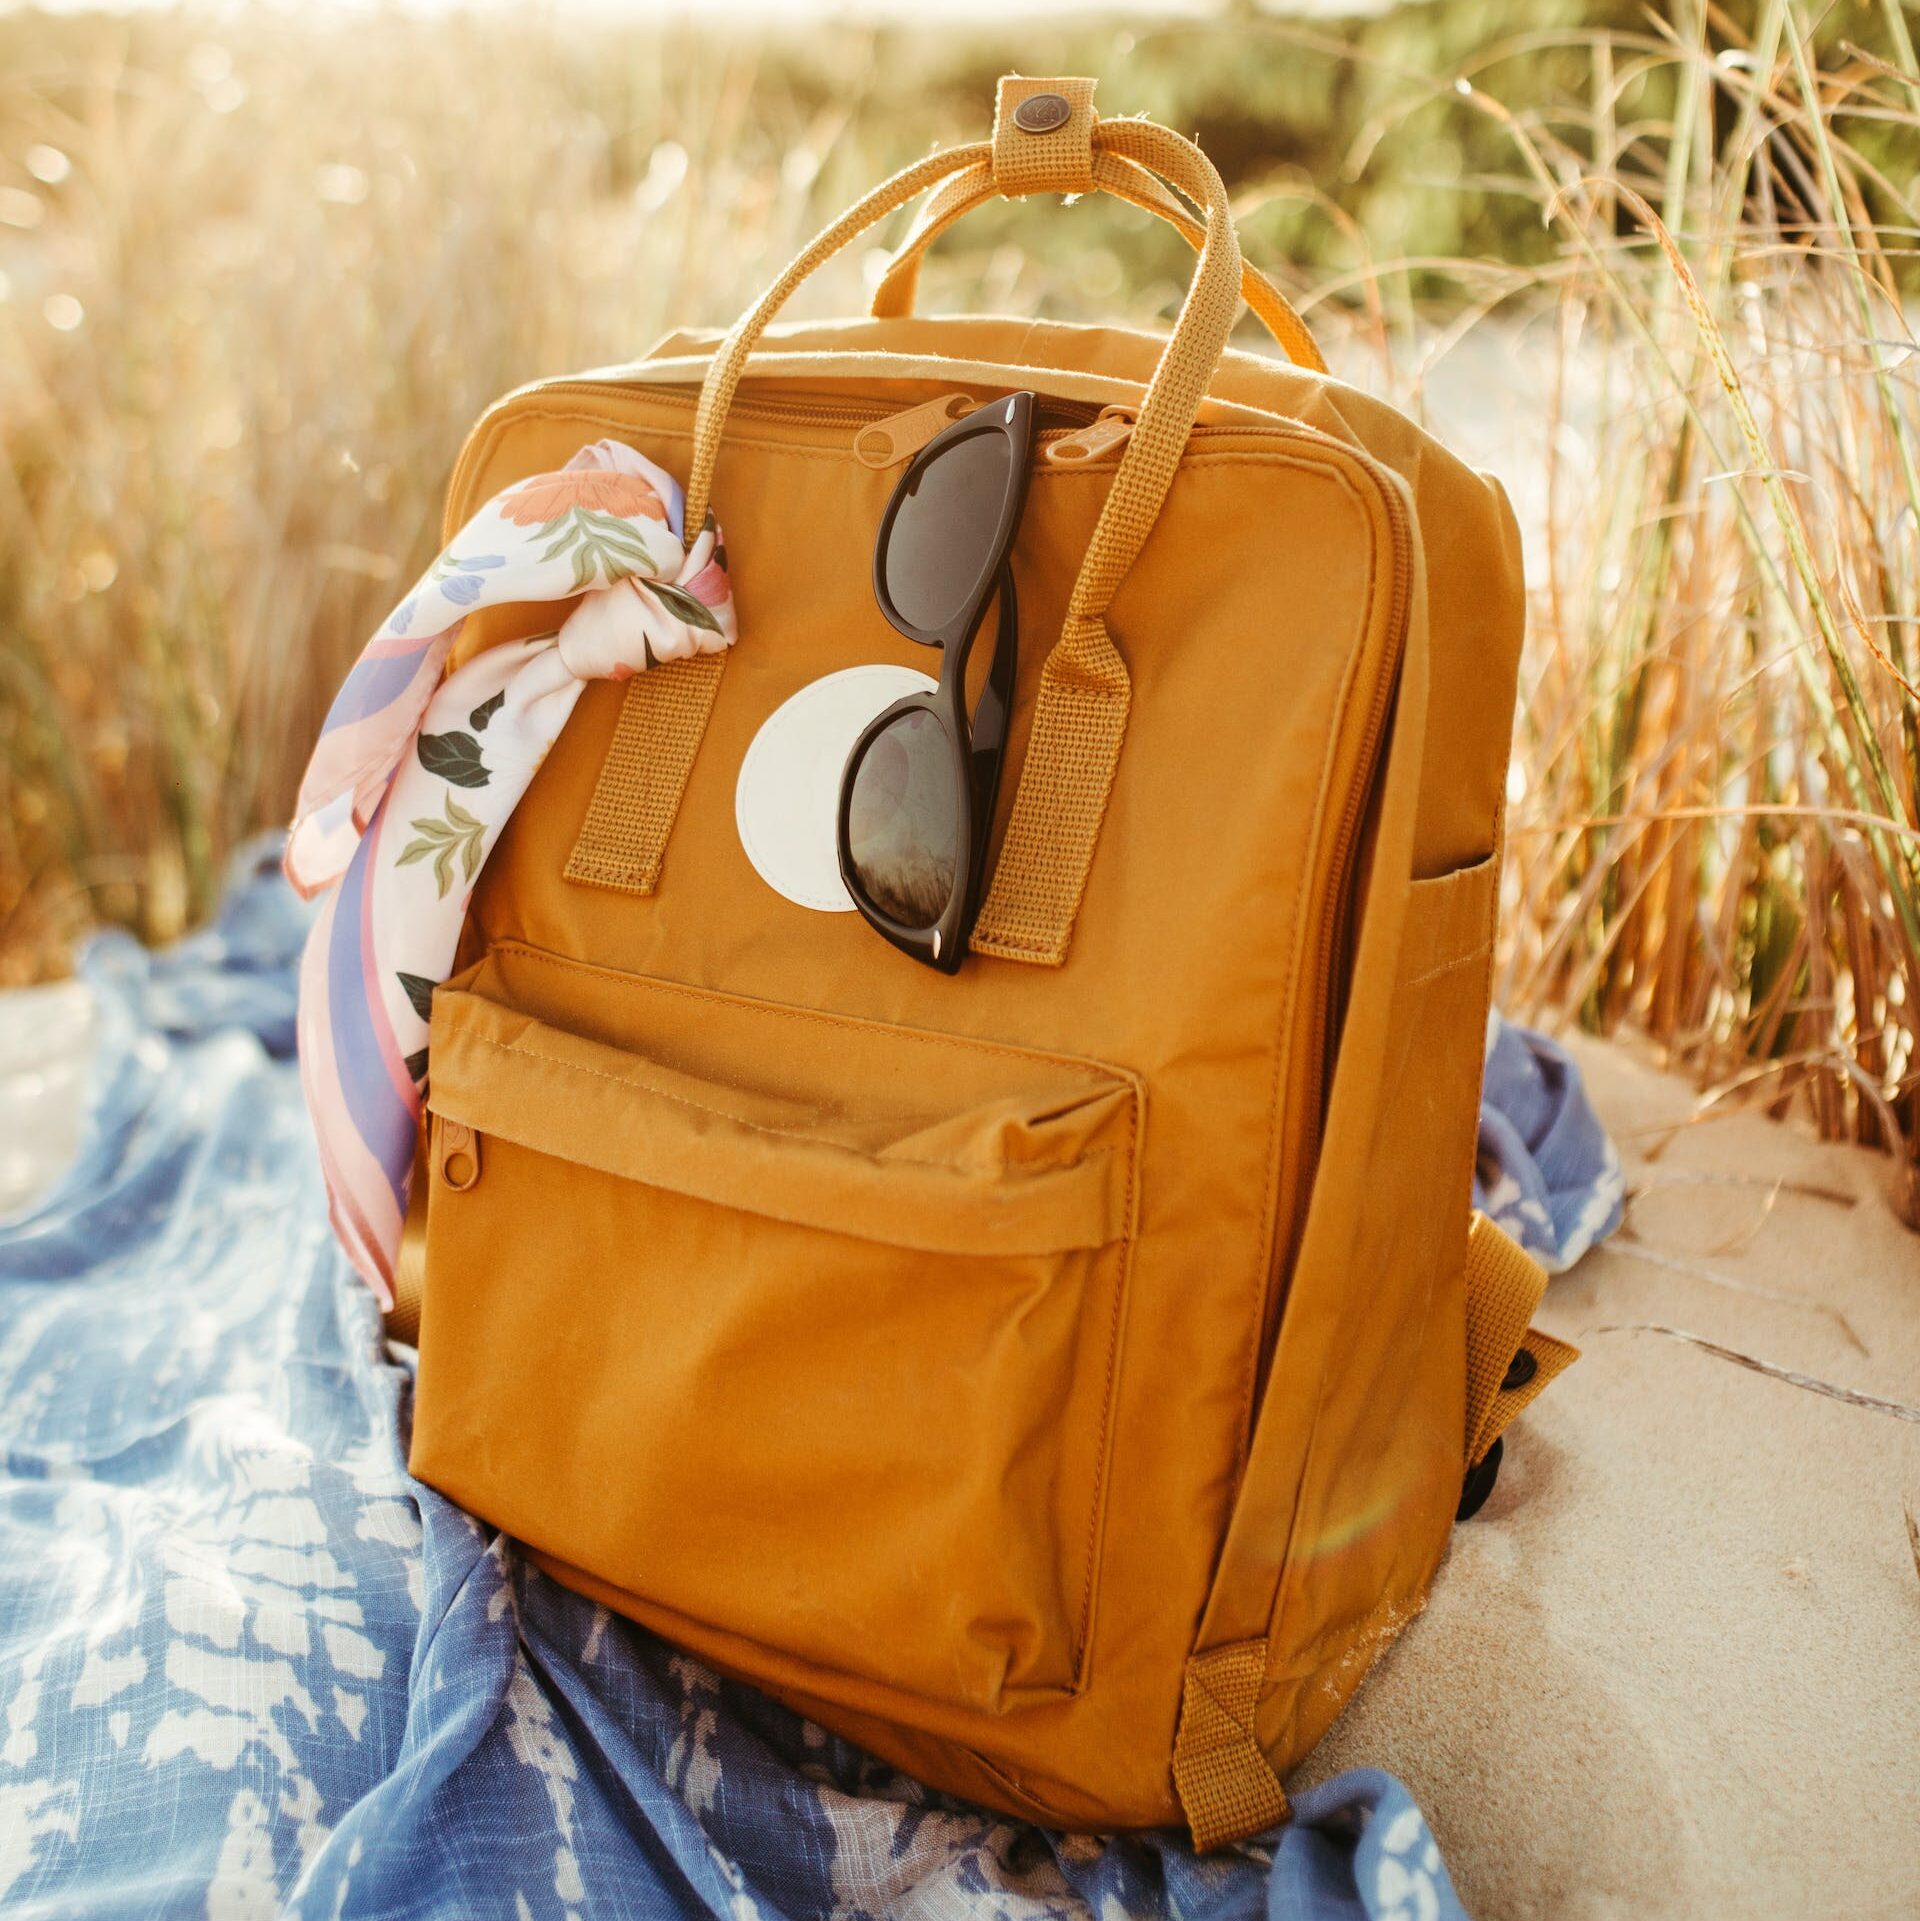 A brown backpack on a beach